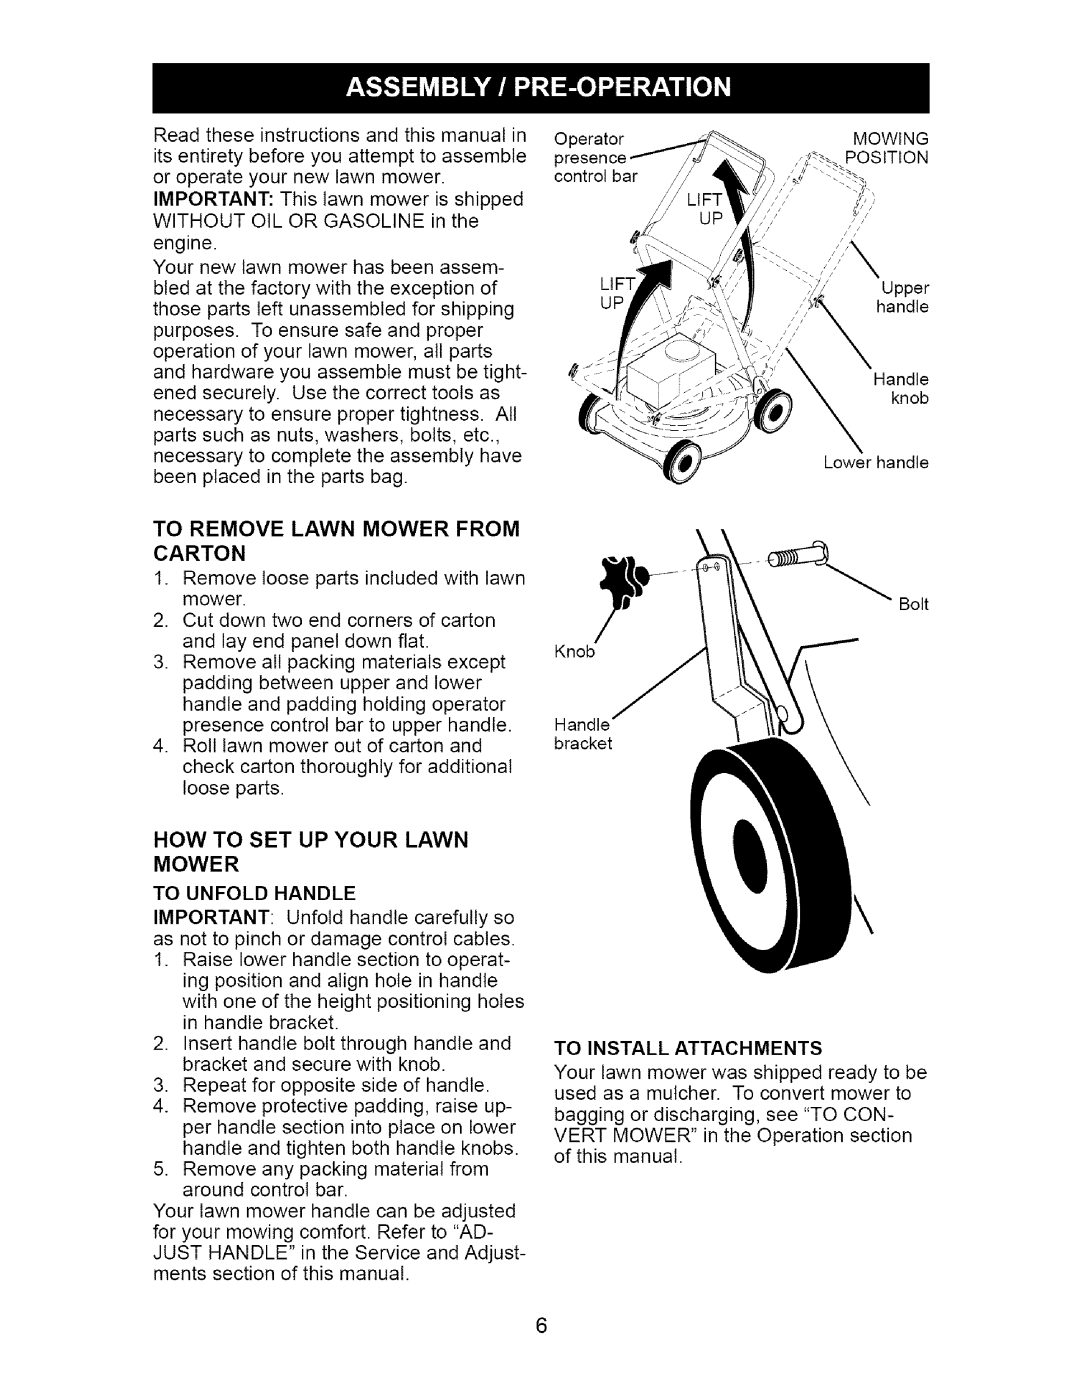 Craftsman 917.37181 How To Set Up Your Lawn Mower, To Remove Lawn Mower From, To Unfold Handle, To Install Attachments 